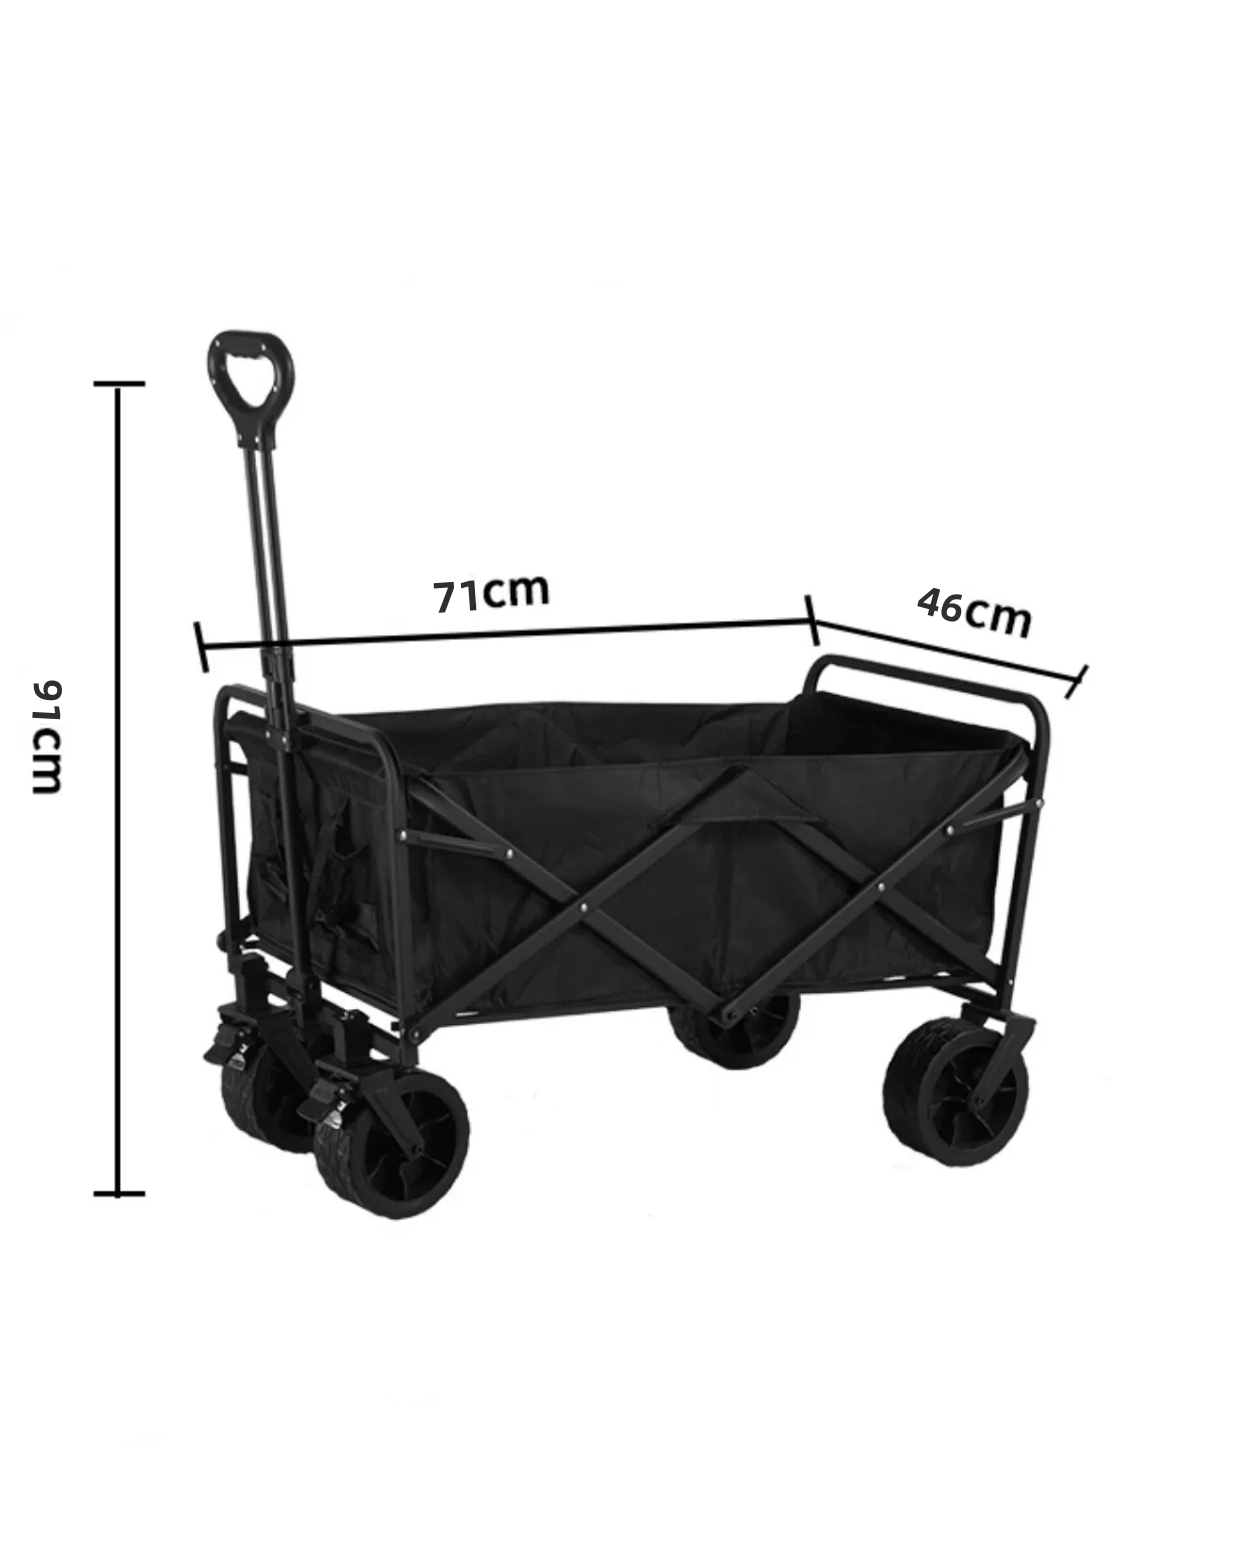 Camping Cart, Folding Portable Lightweight Wagon For Outdoor Picnic Camping